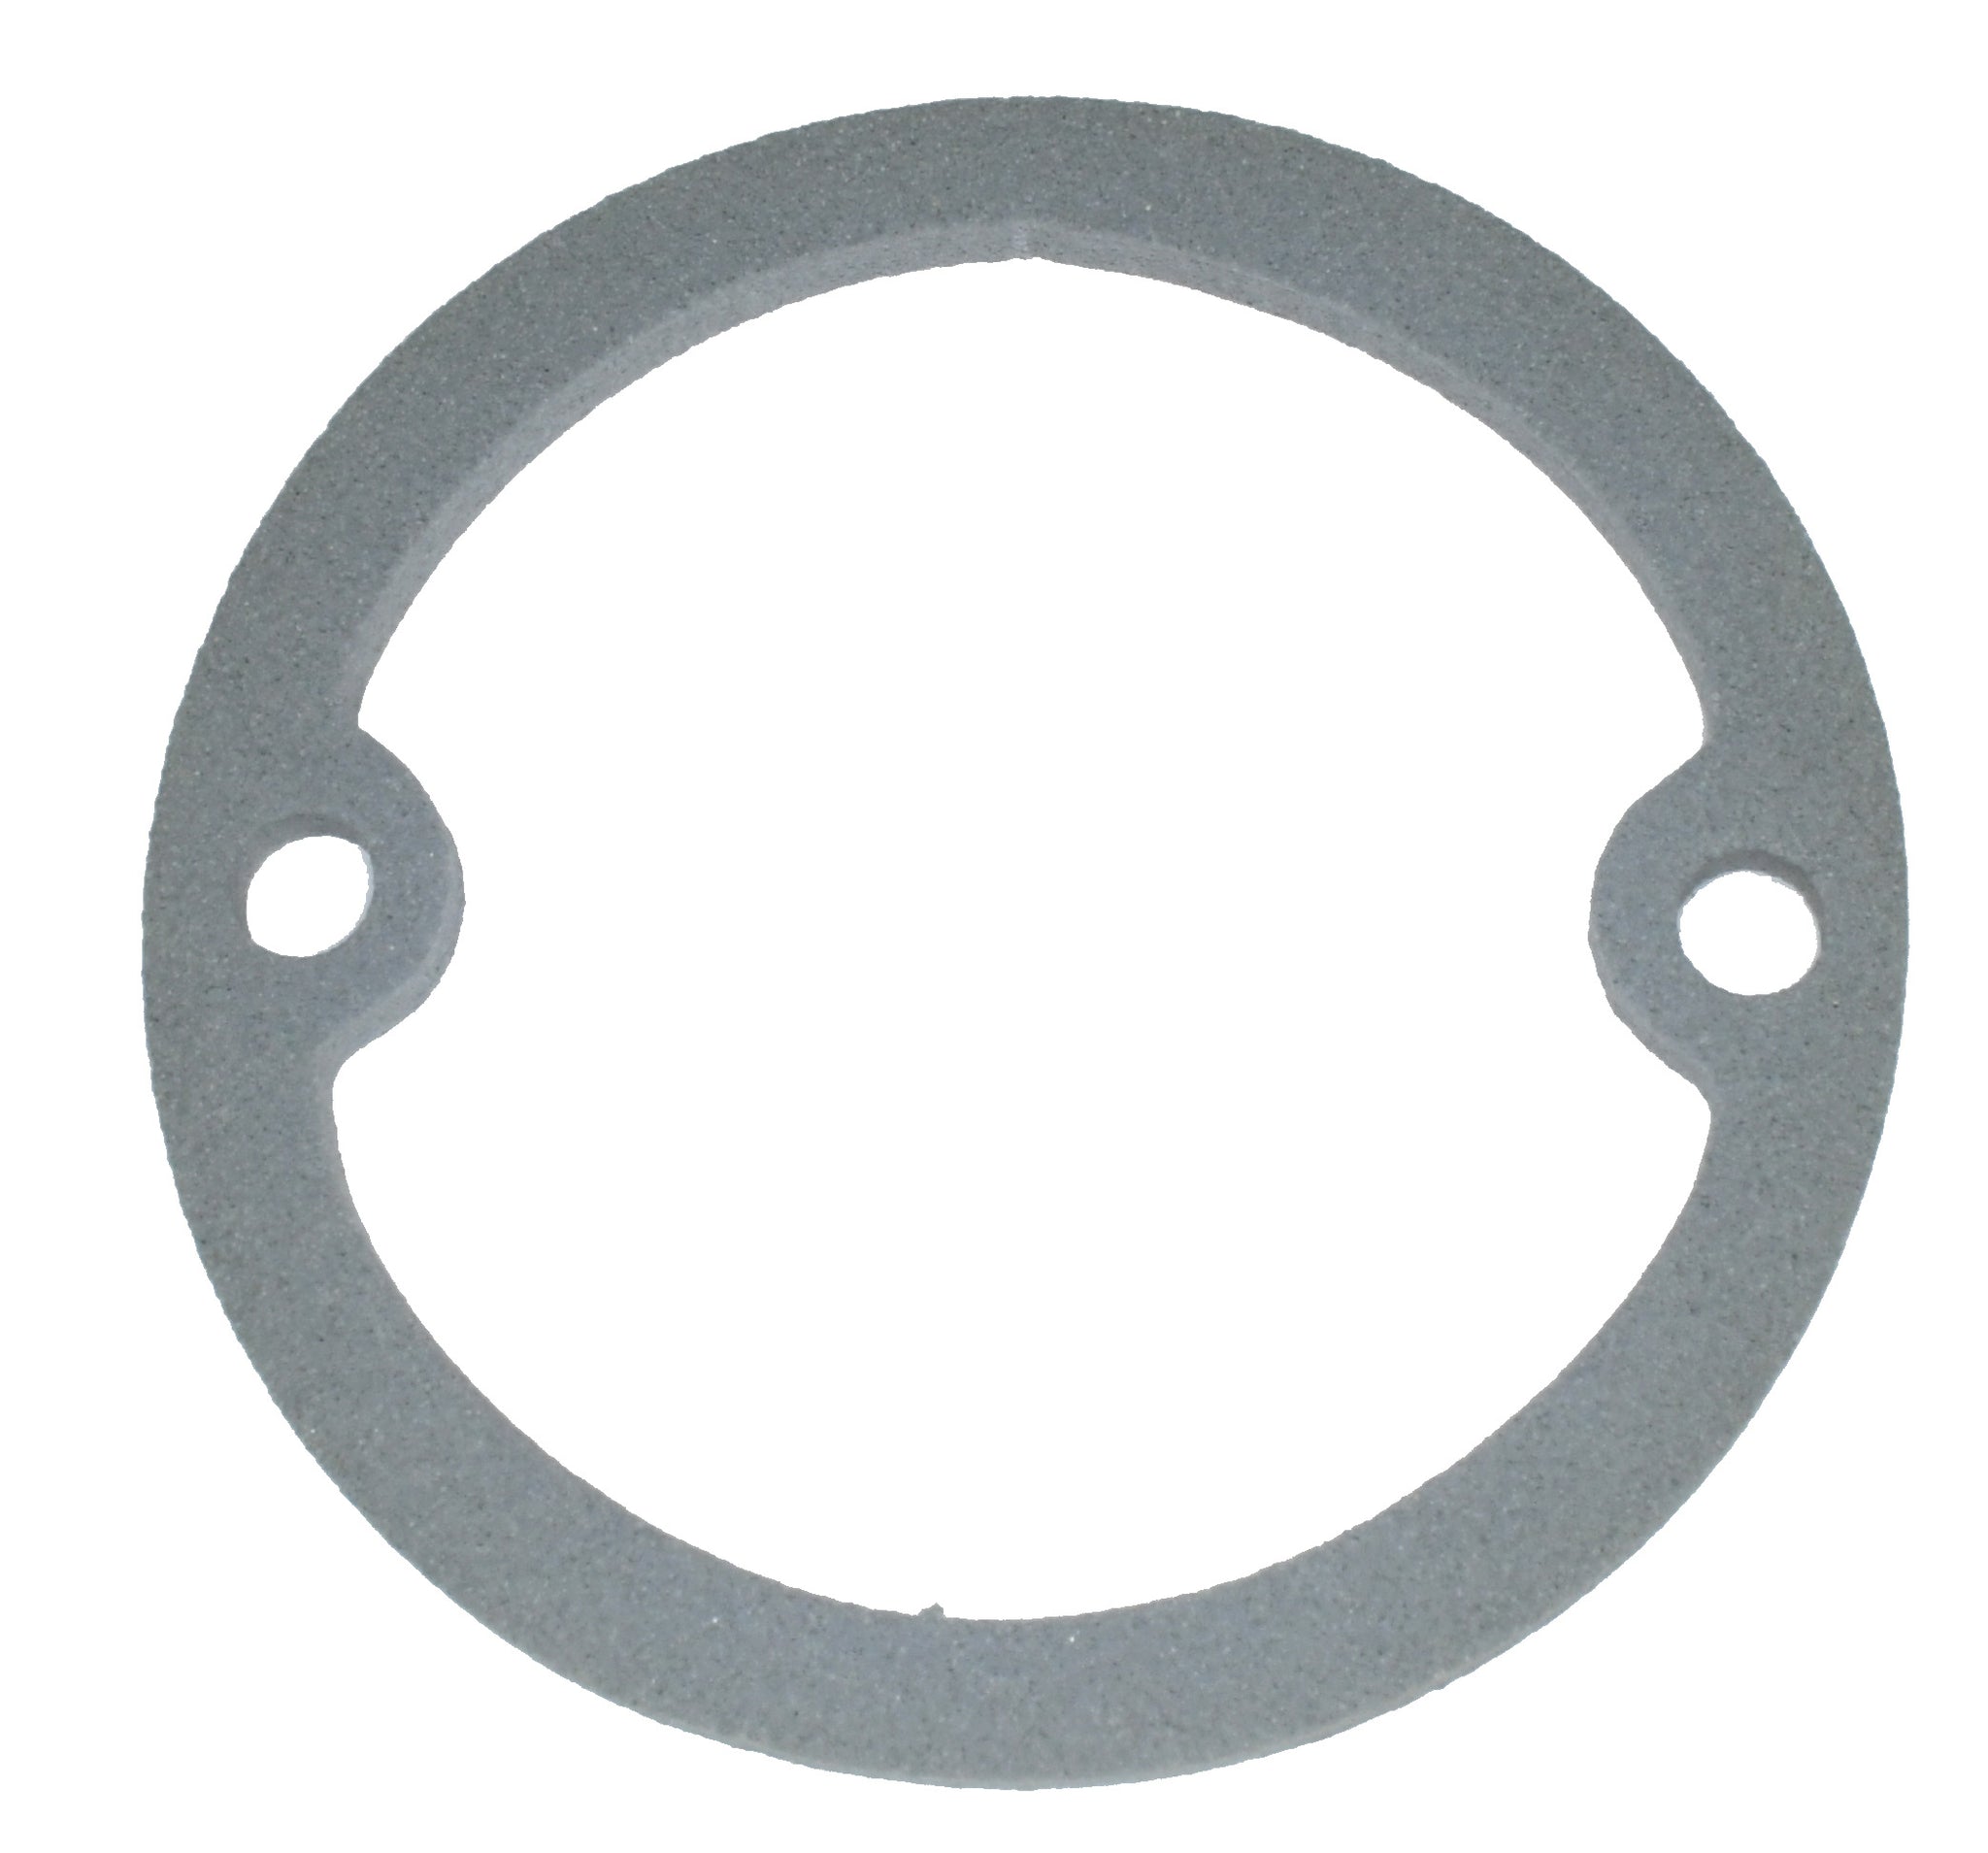 New correct reverse light fixture gasket for 1965-1970 Mustang C5ZZ-15510-A